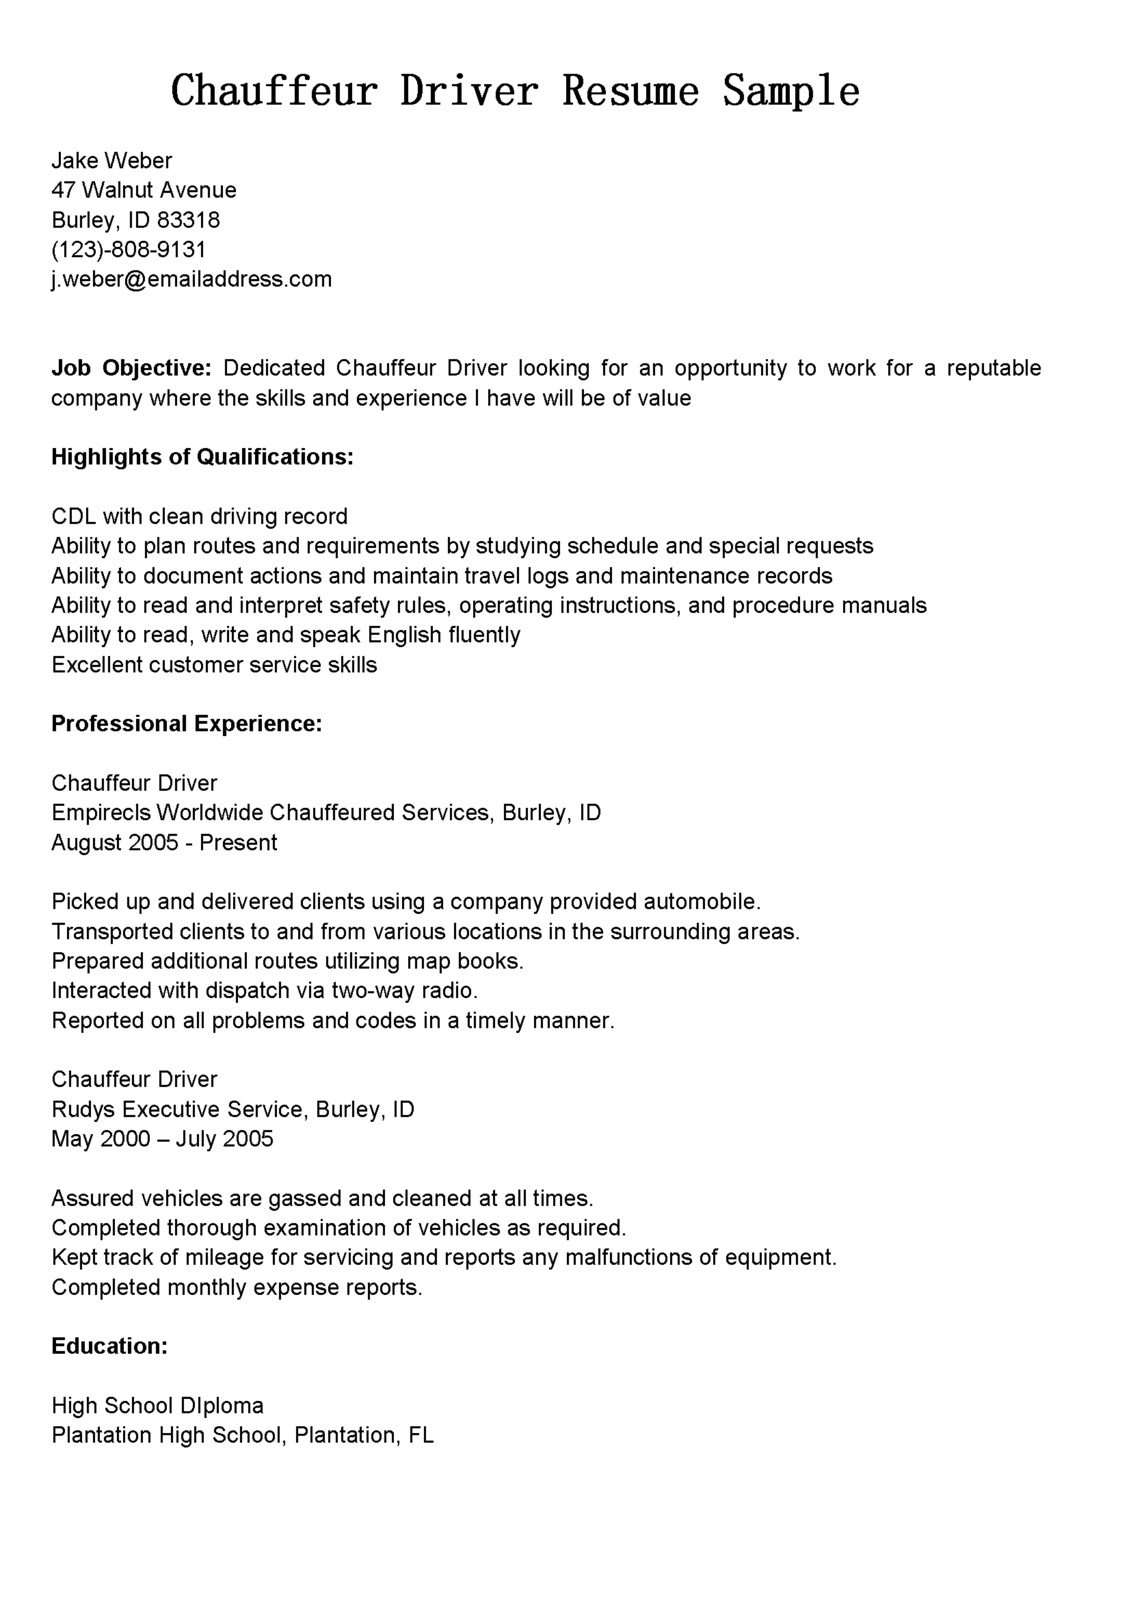 Driver Resumes: Chauffeur Driver Resume Sample